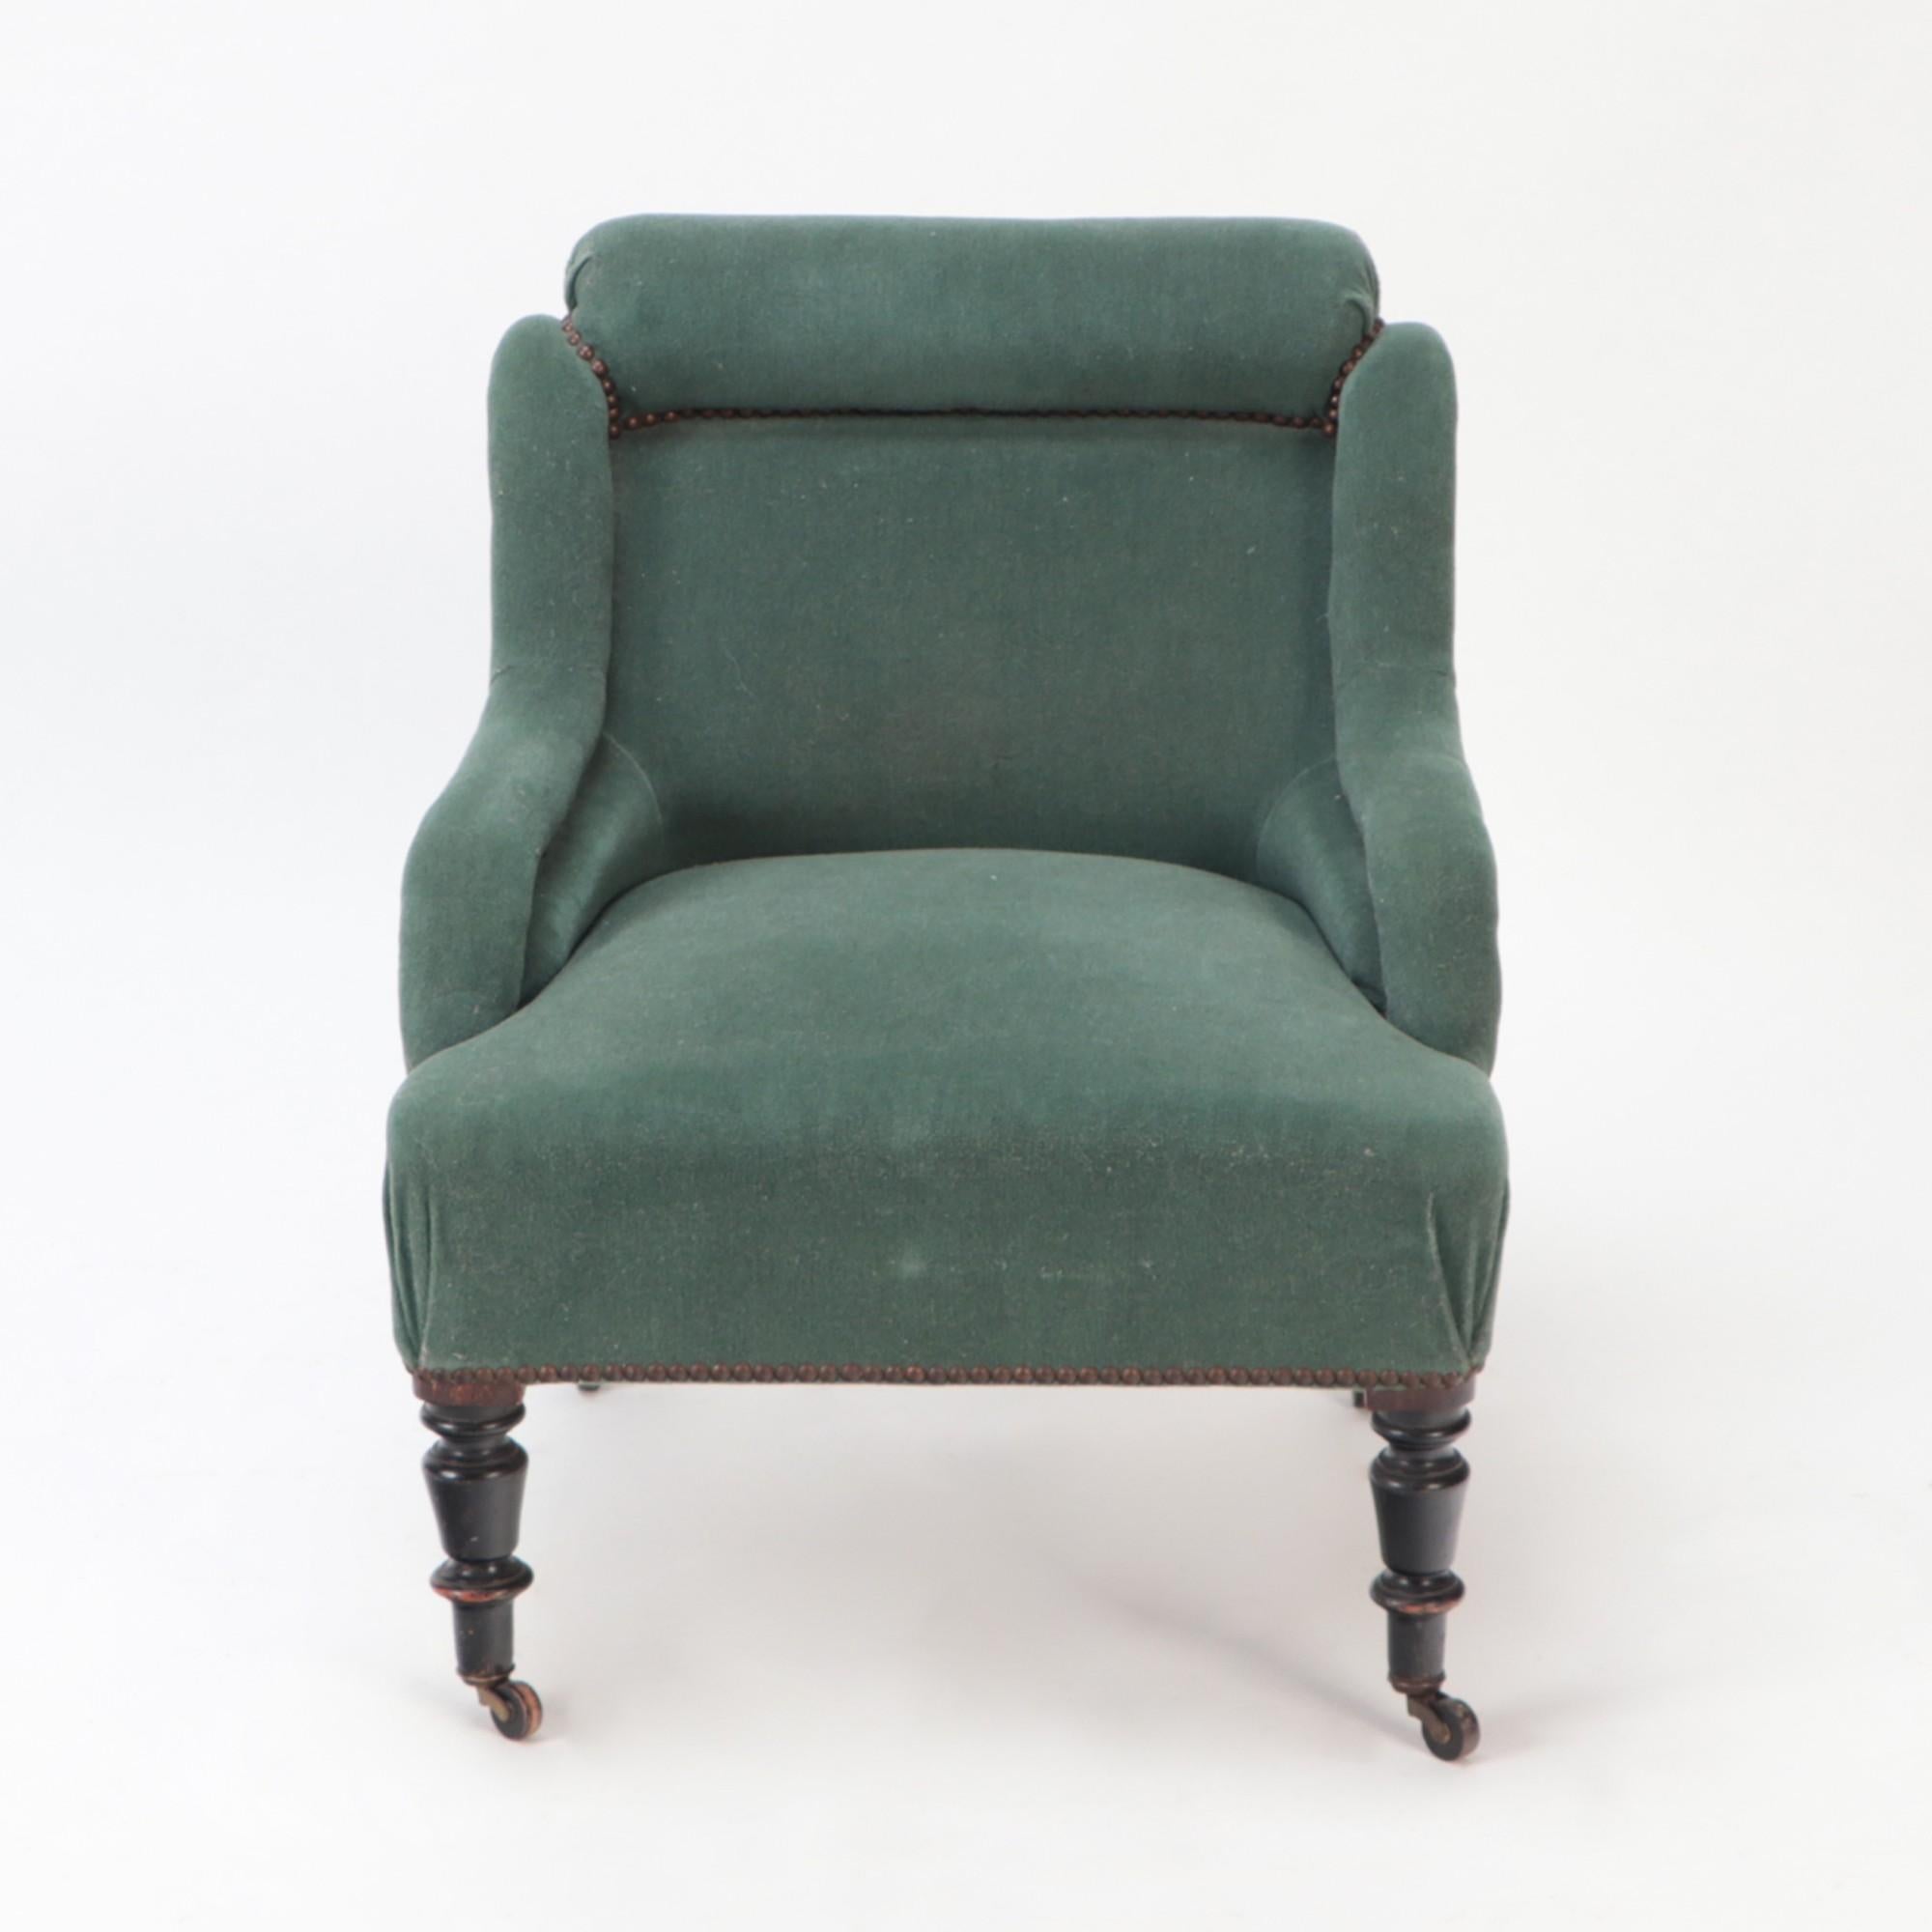 A small French Napoleon III green upholstered armchair, late 19th C. Turned legs ending in casters.